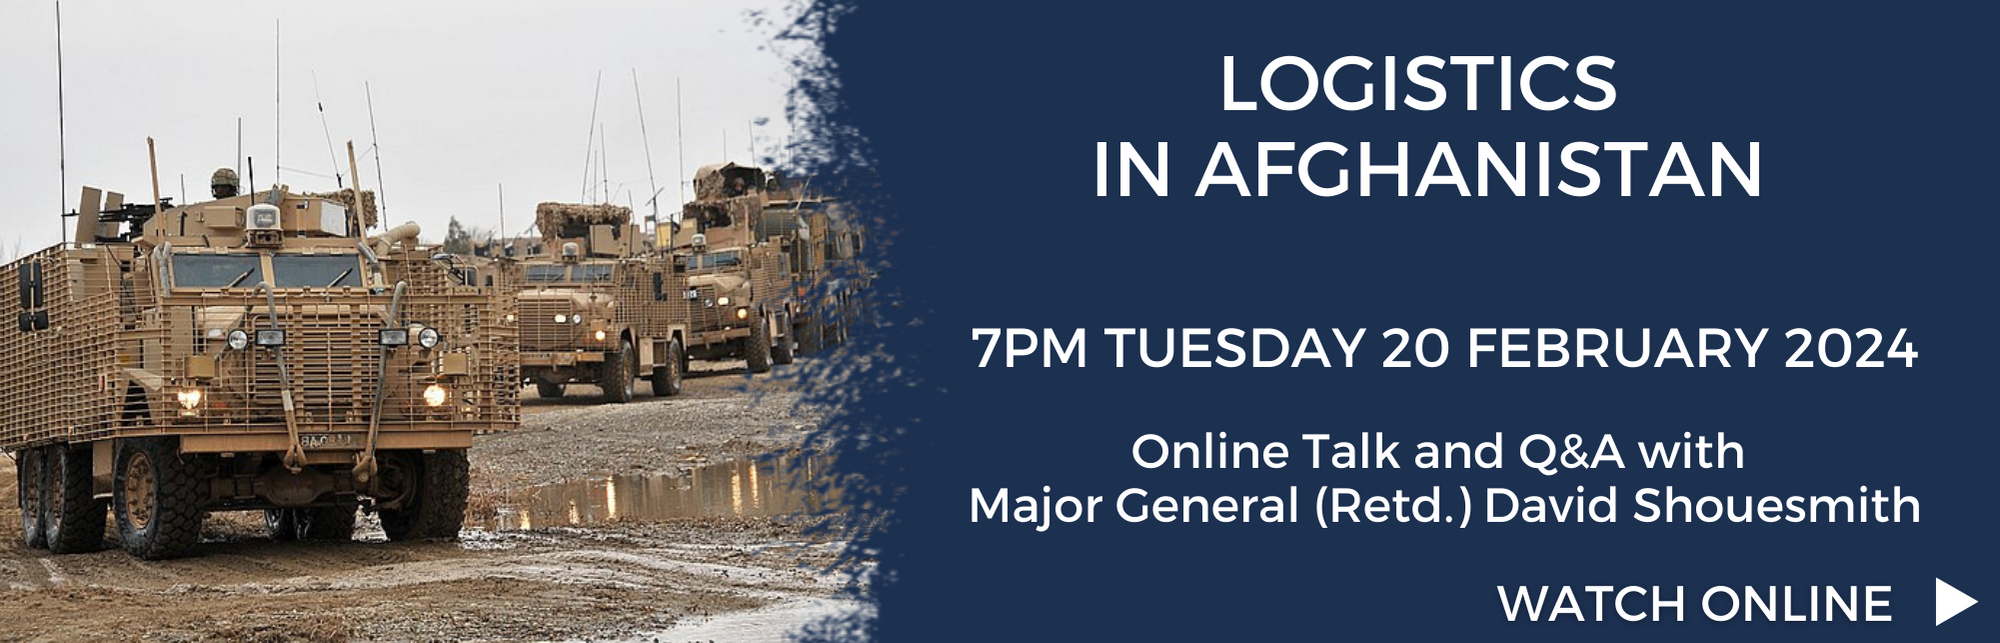 Logistics in Afghanistan – Online Talk and Live Q&A